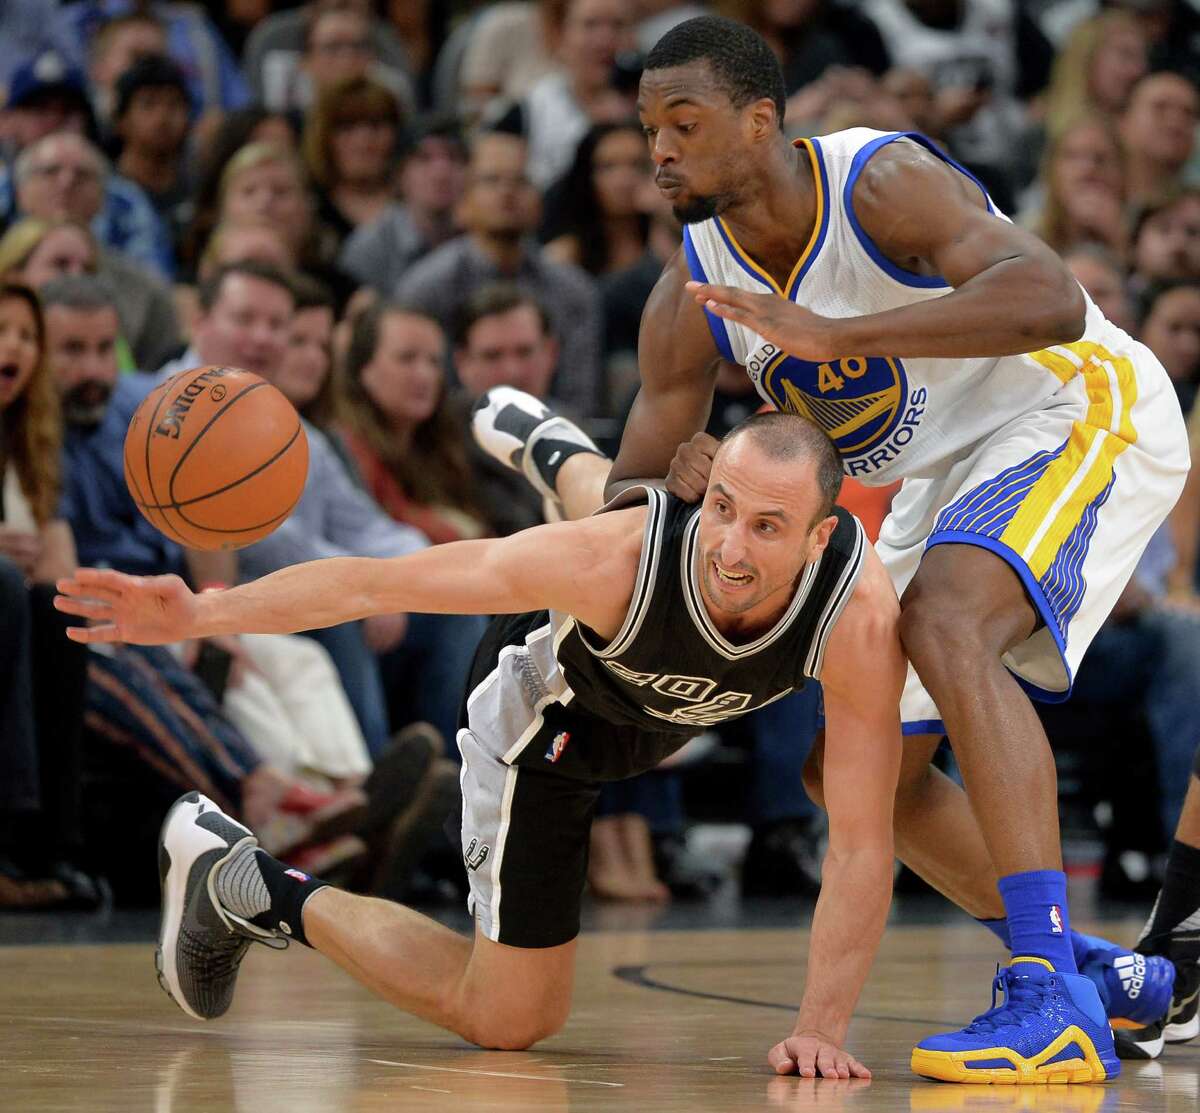 San Antonio Spurs' Manu Ginobili, bottom, of Argentina, chases the ball against Golden State Warriors' Harrison Barnes during the first half of an NBA basketball game, Sunday, April 10, 2016, in San Antonio. (AP Photo/Darren Abate)